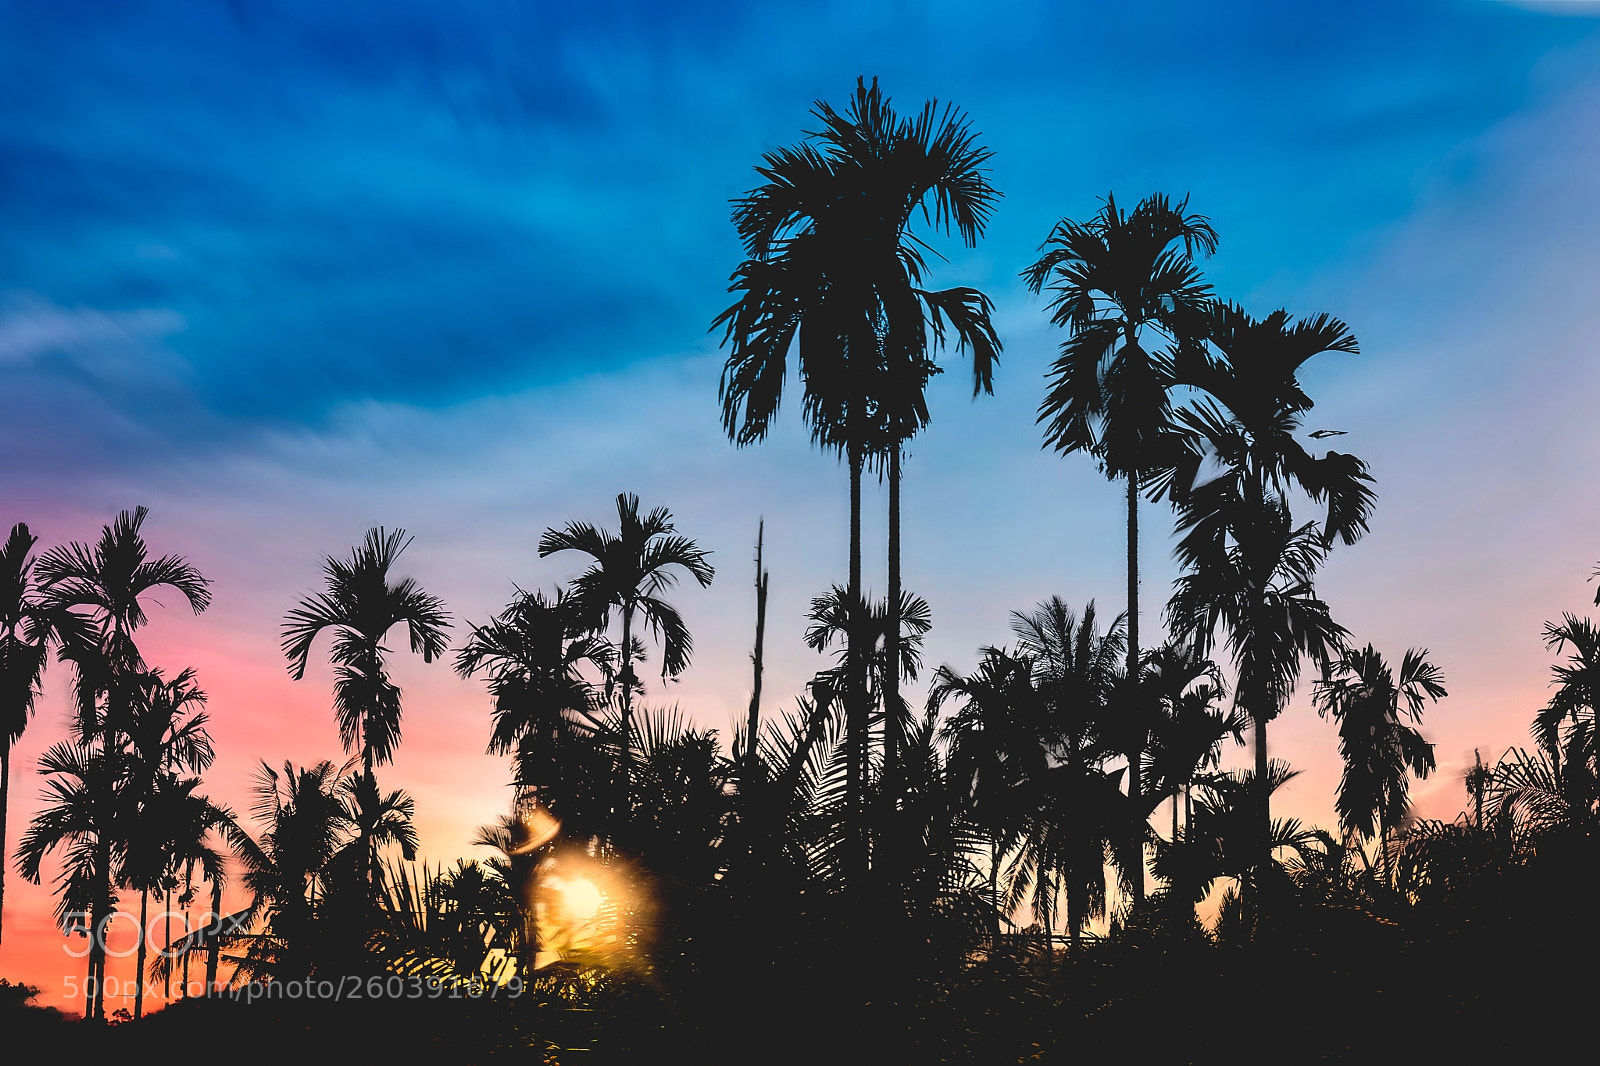 Sony a7 III sample photo. Sunset behind palm trees photography